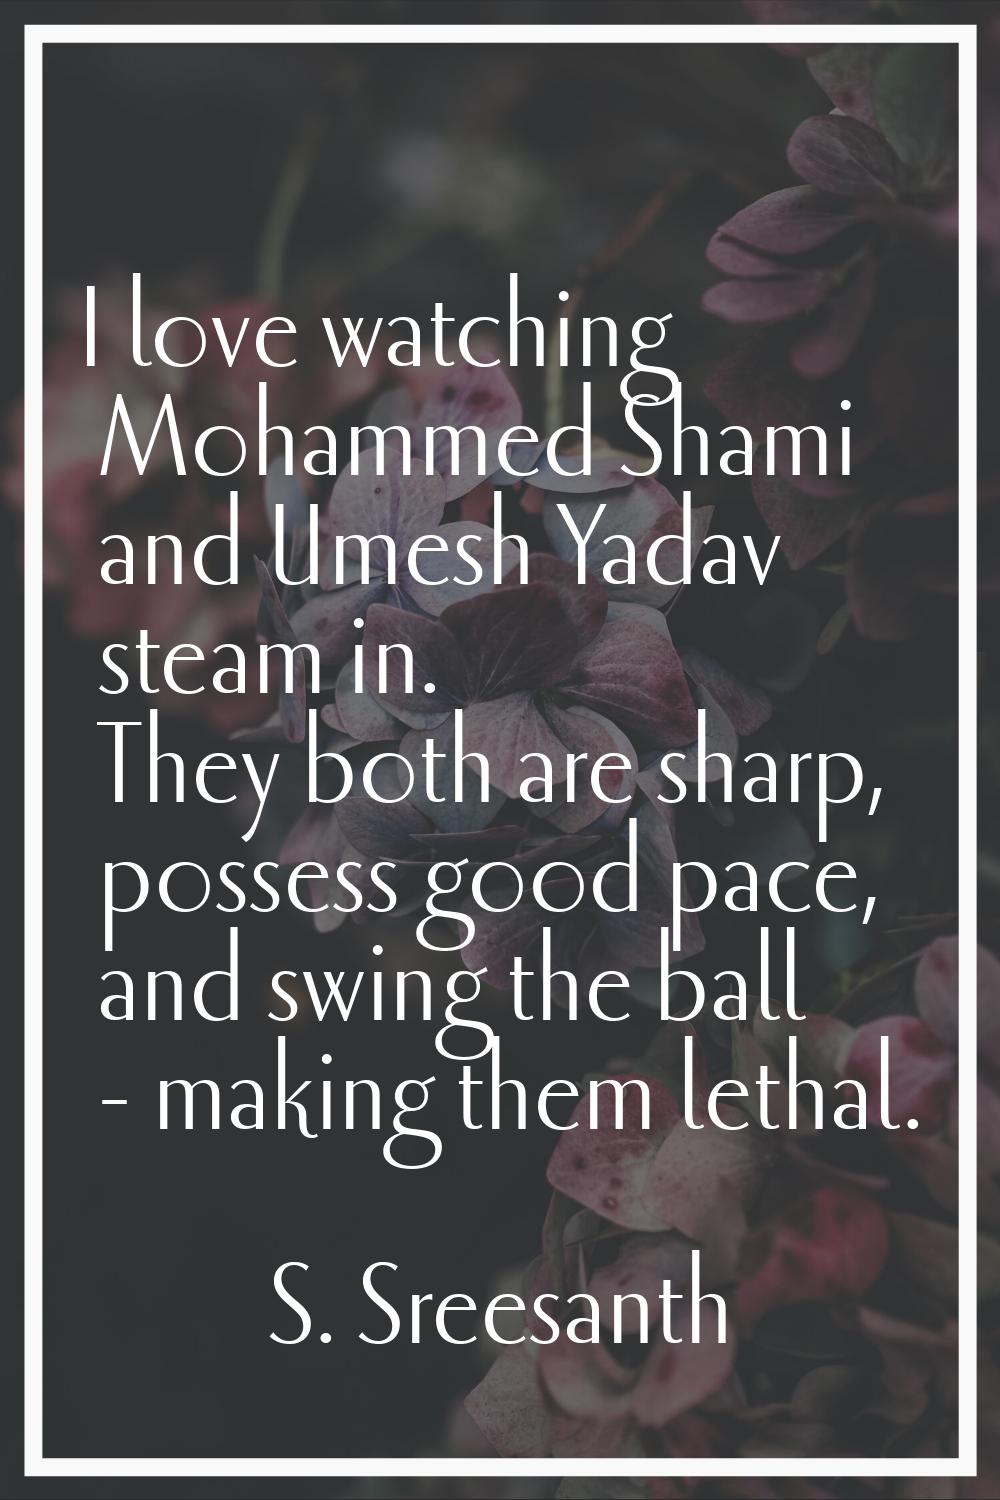 I love watching Mohammed Shami and Umesh Yadav steam in. They both are sharp, possess good pace, an